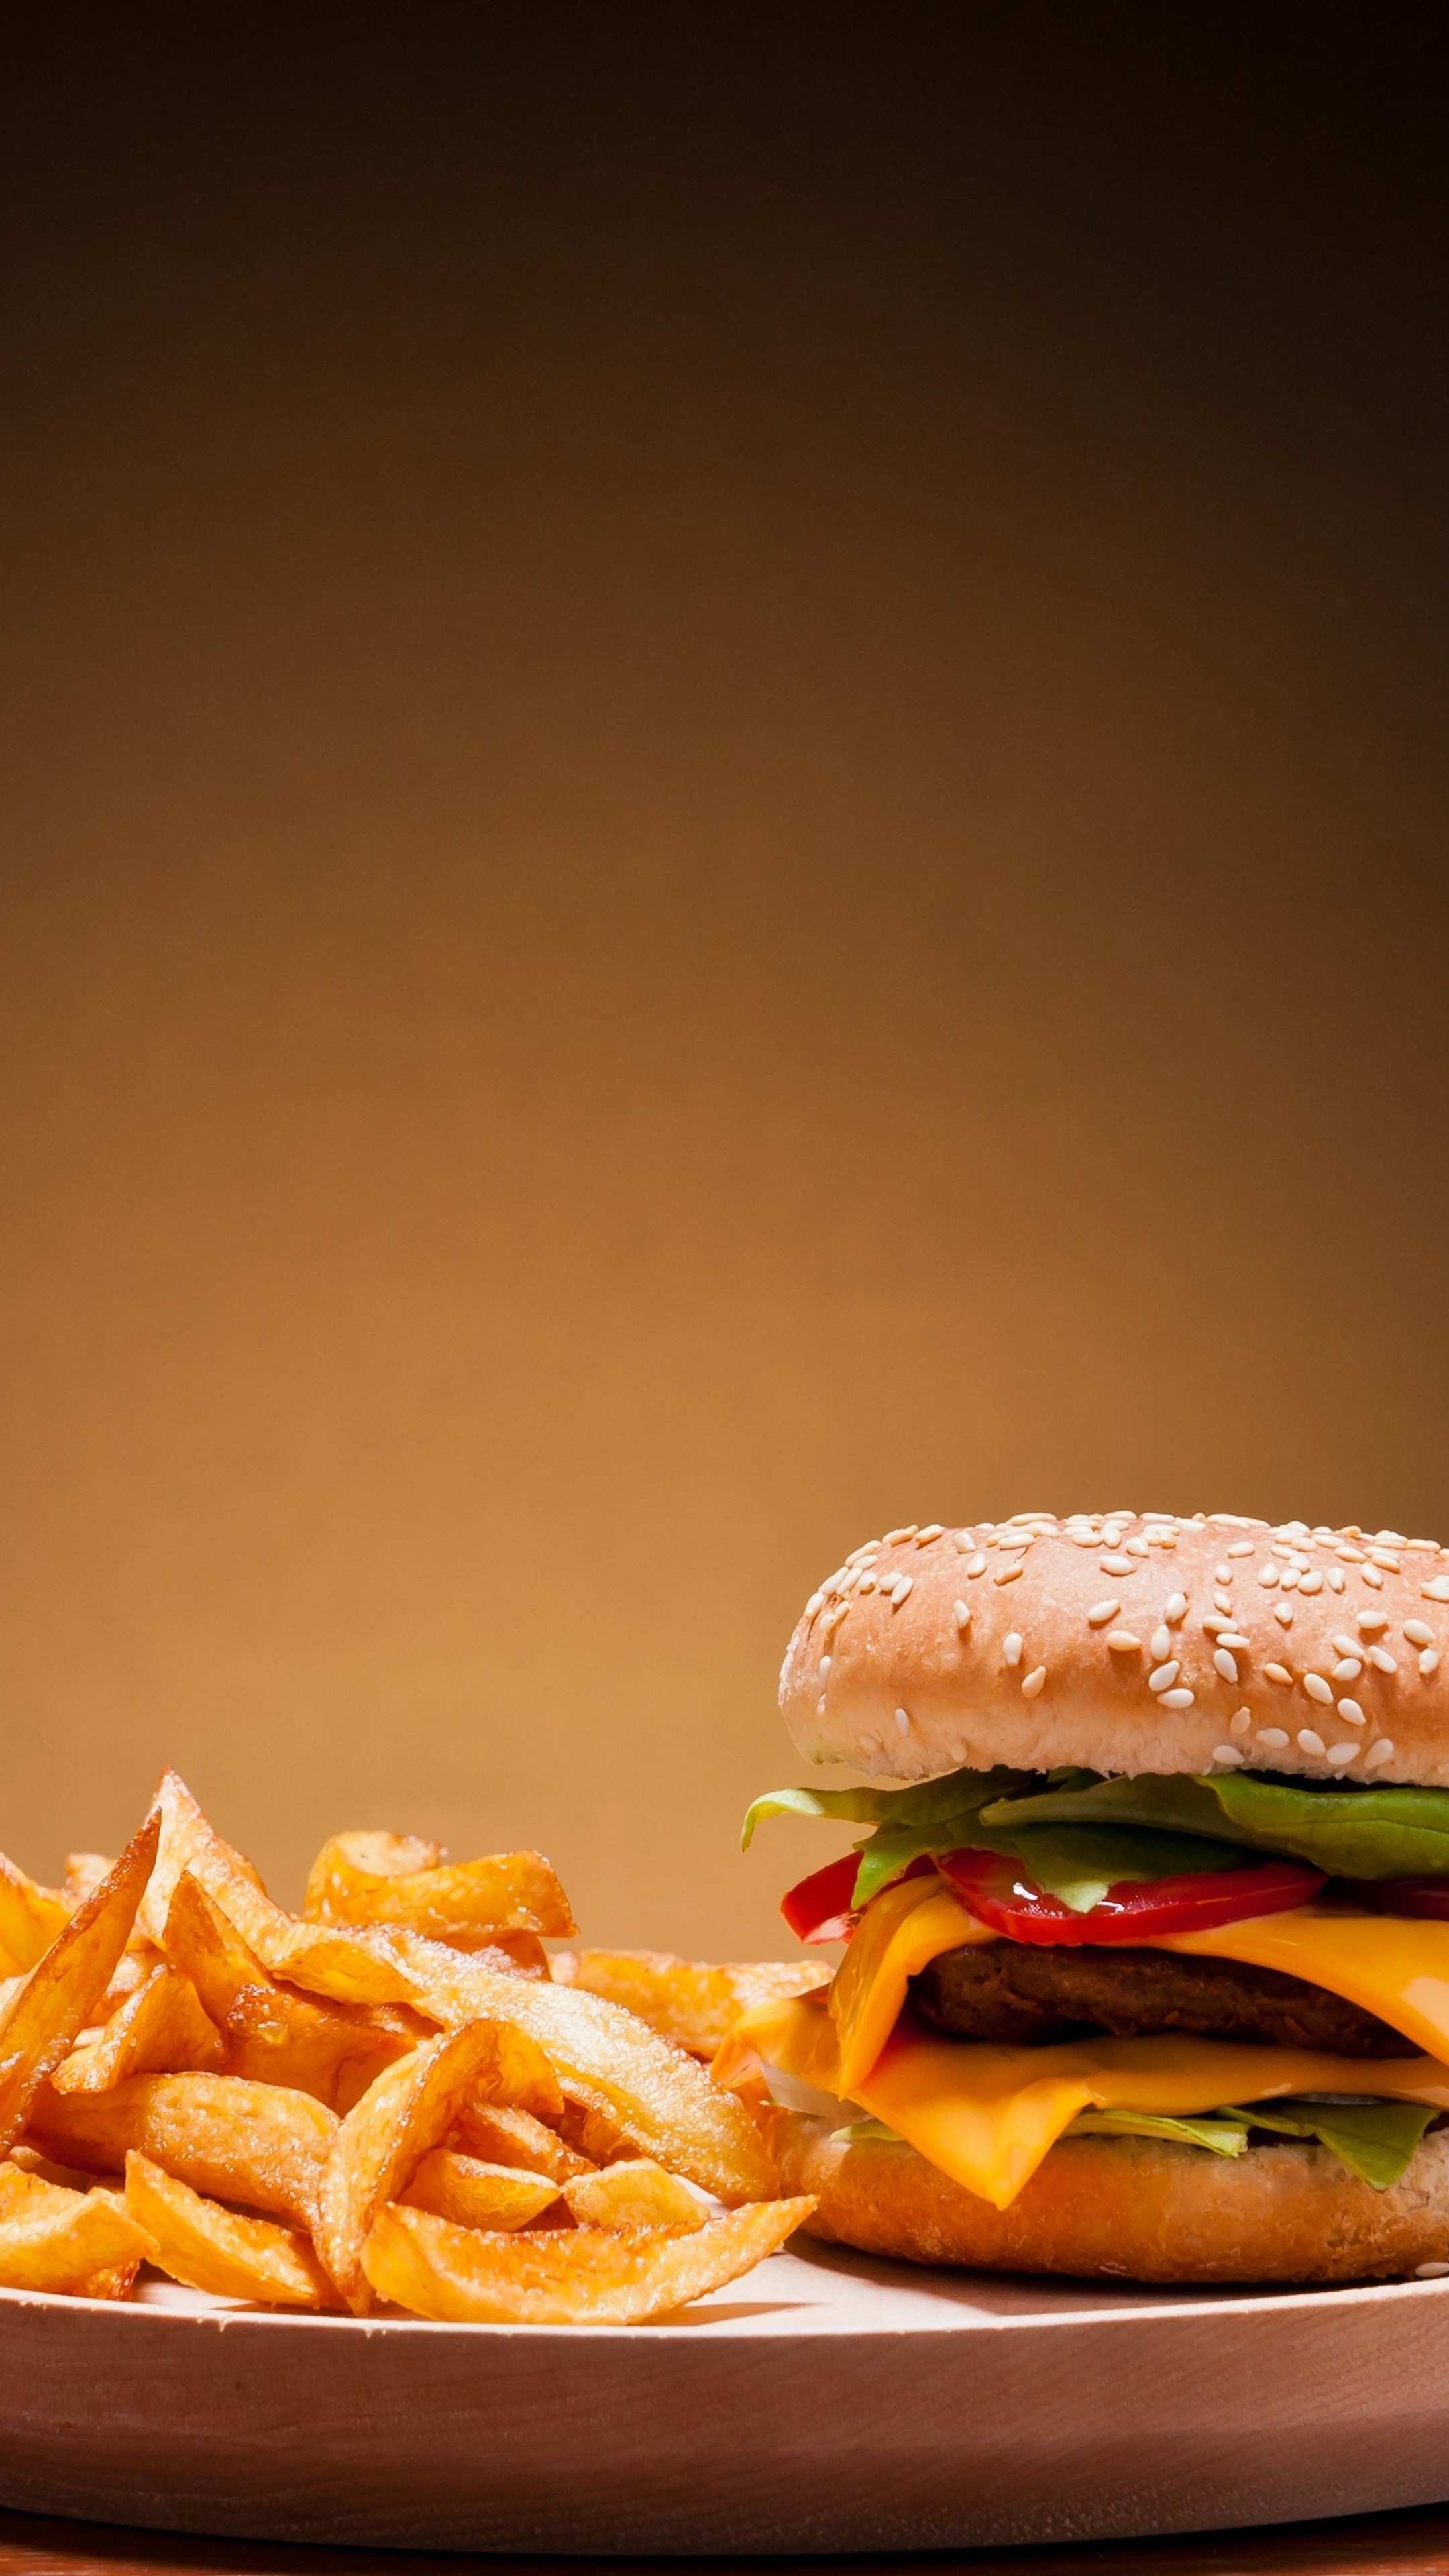 Hamburger: Sold at fast-food restaurants, diners, eateries. 2160x3840 4K Background.